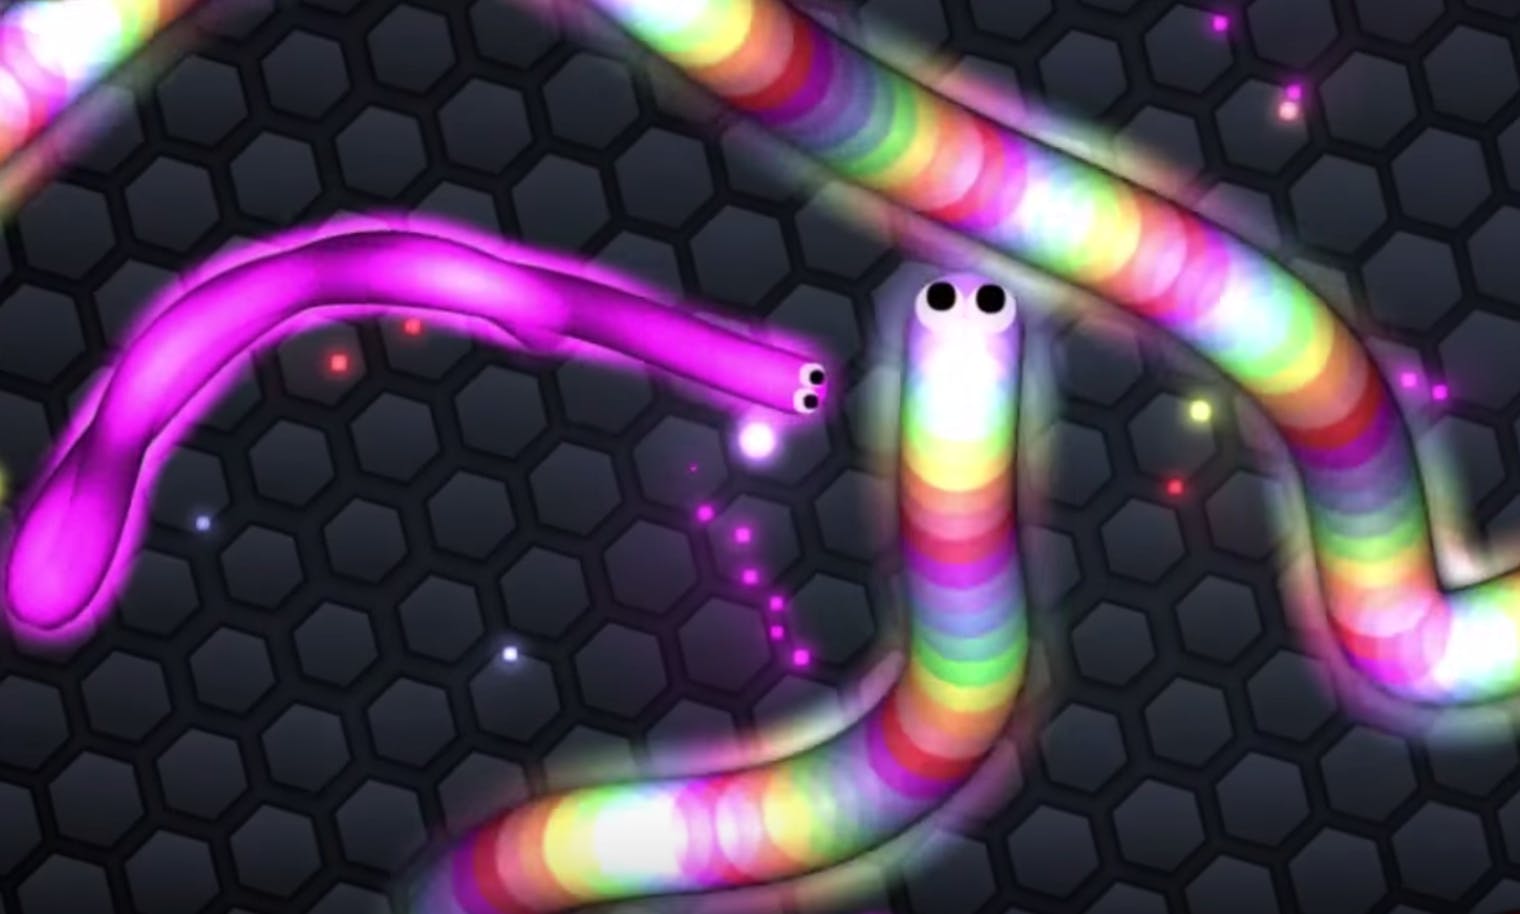 Using 2 HACKED SNAKES To WIN! (Slither.io) 